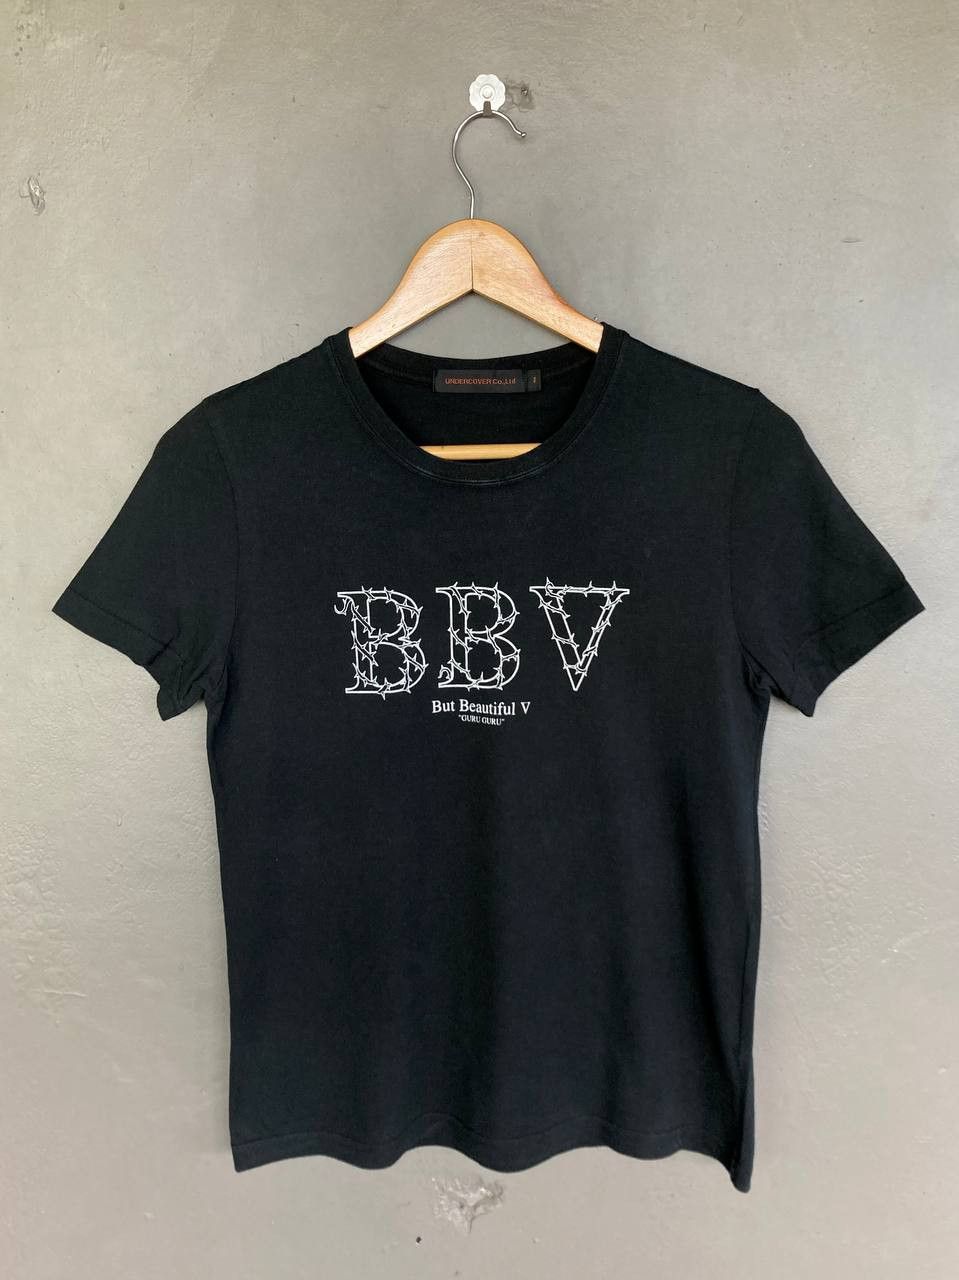 AW06 Undercover “But Beautiful V” Tee - 3